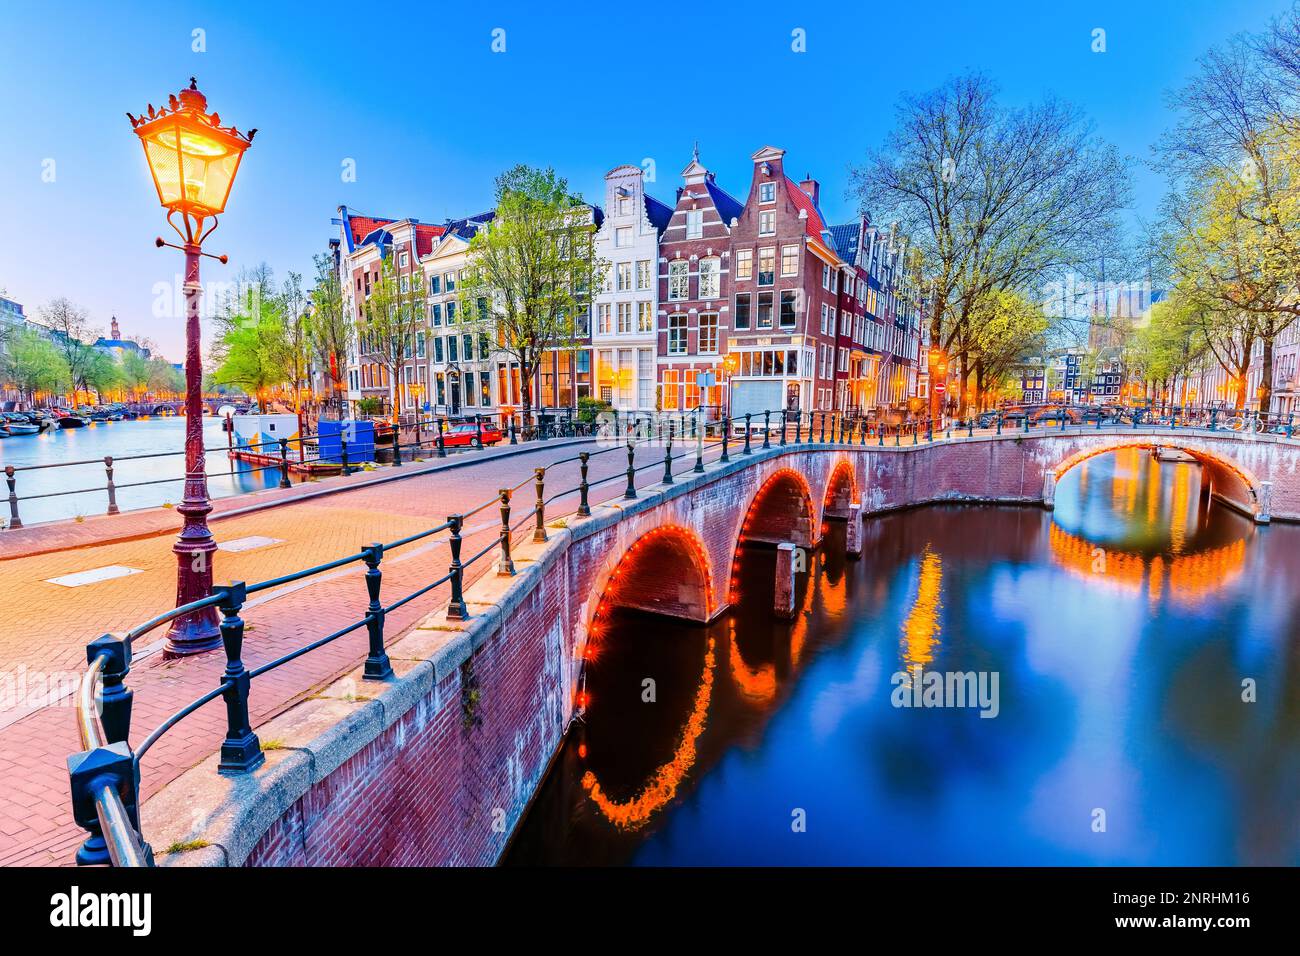 Amsterdam, Netherlands. The Keizersgracht (Emperor's) canals and bridges at night. Stock Photo